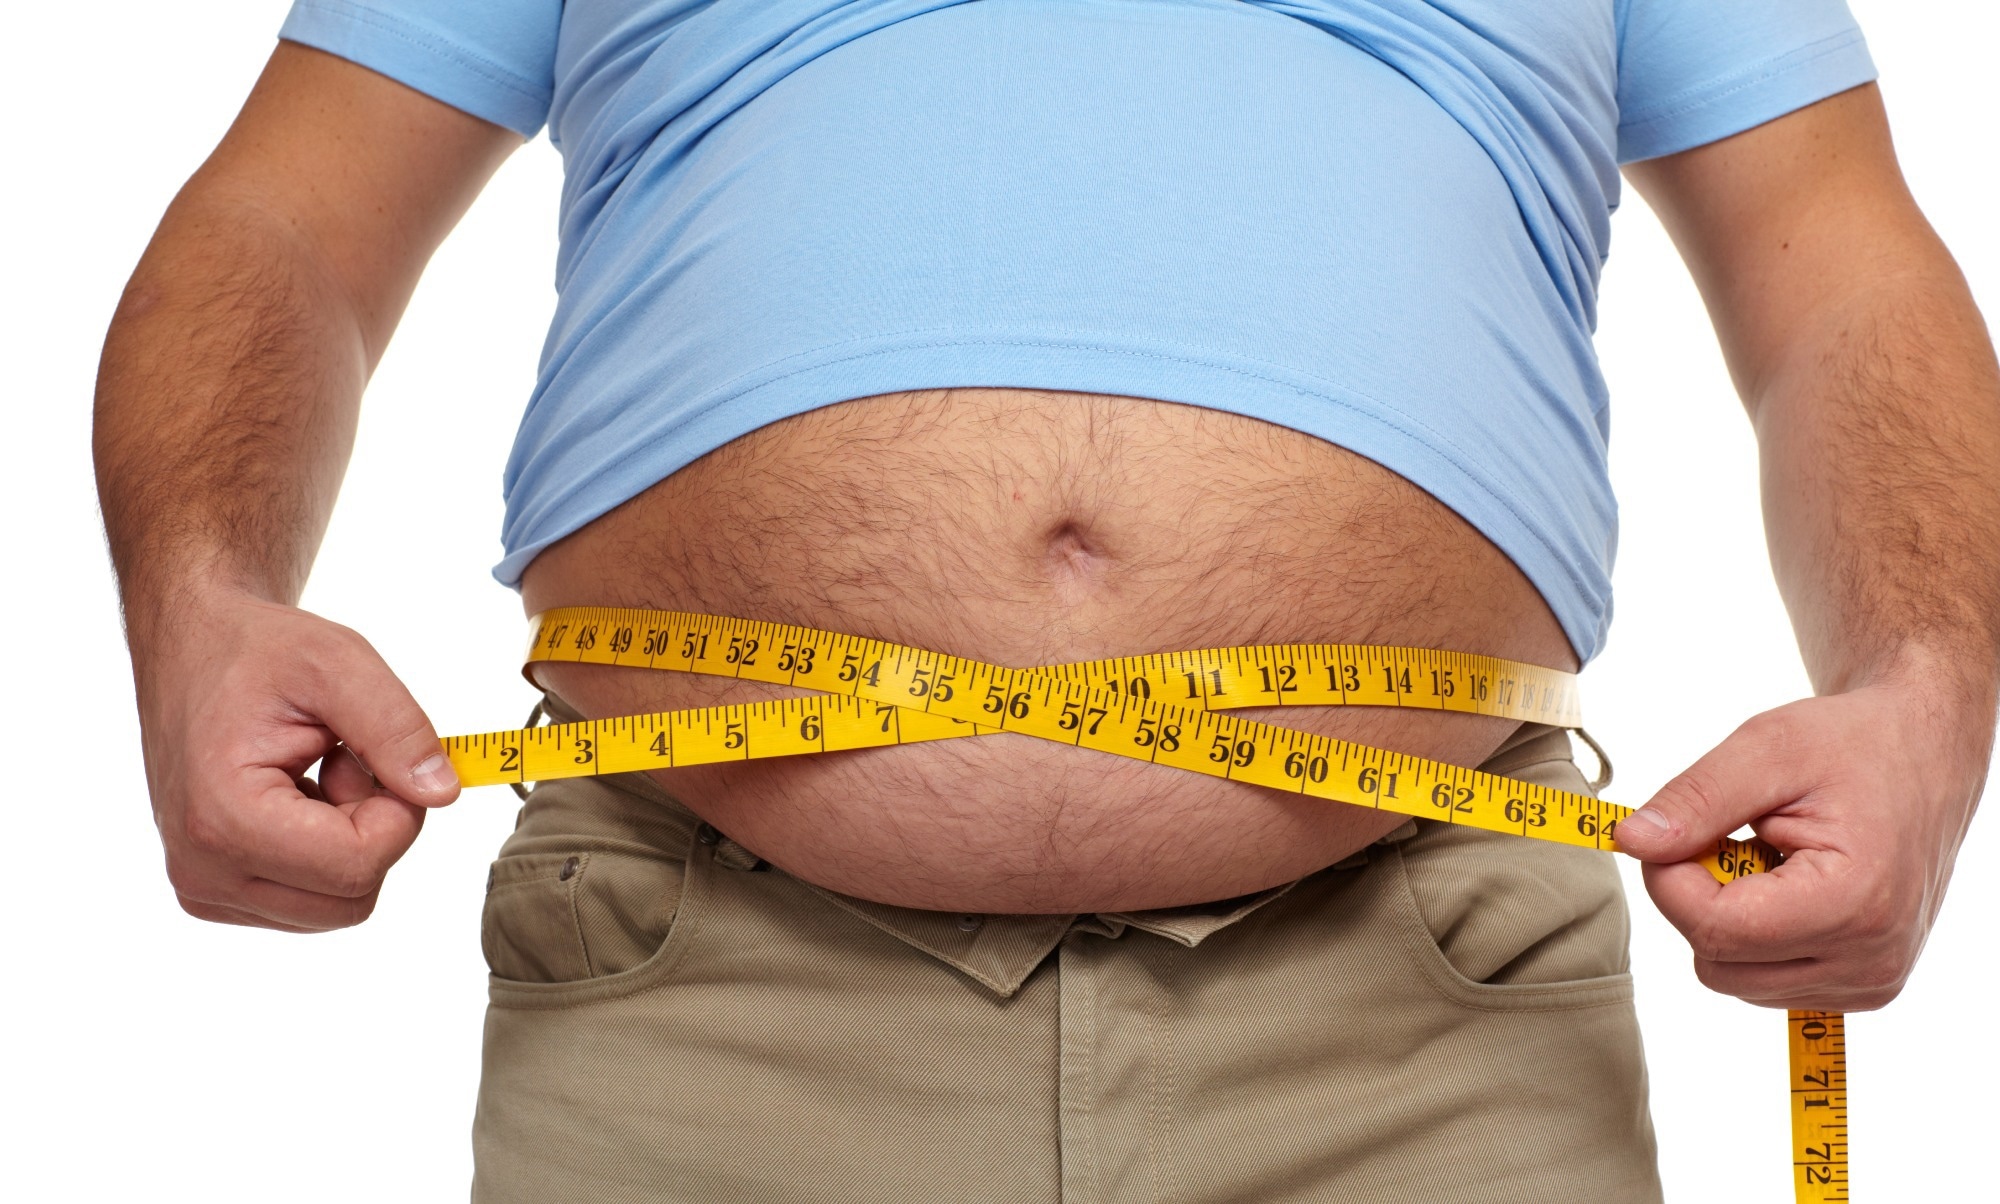 Study: Continued Treatment With Tirzepatide for Maintenance of Weight Reduction in Adults With Obesity. Image Credit: kurhan / Shutterstock